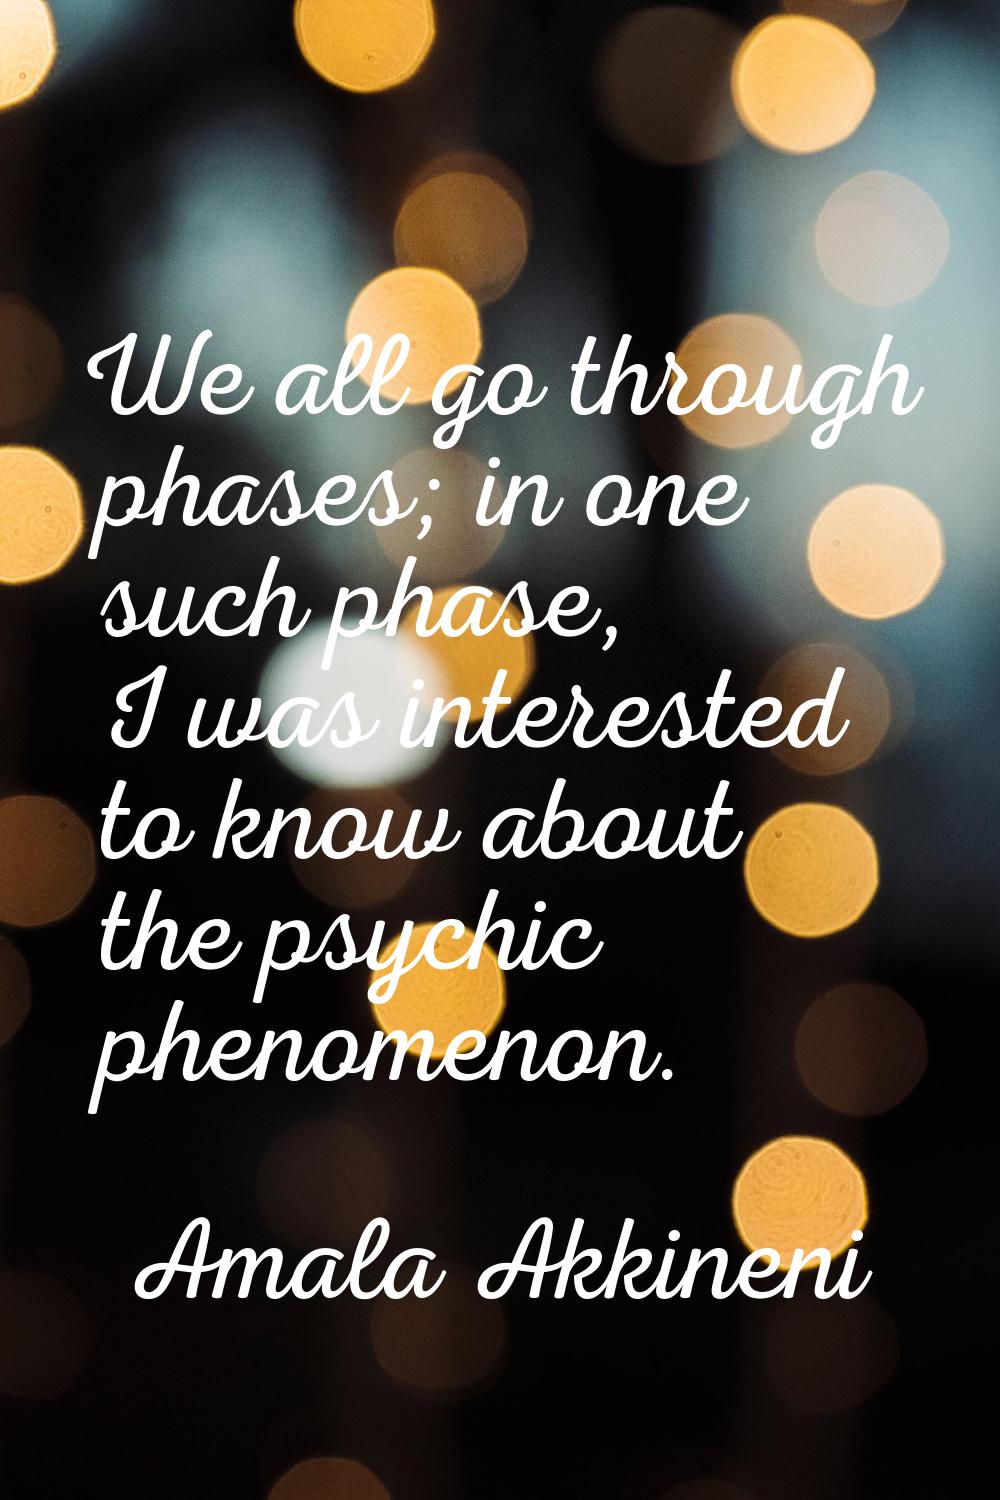 We all go through phases; in one such phase, I was interested to know about the psychic phenomenon.